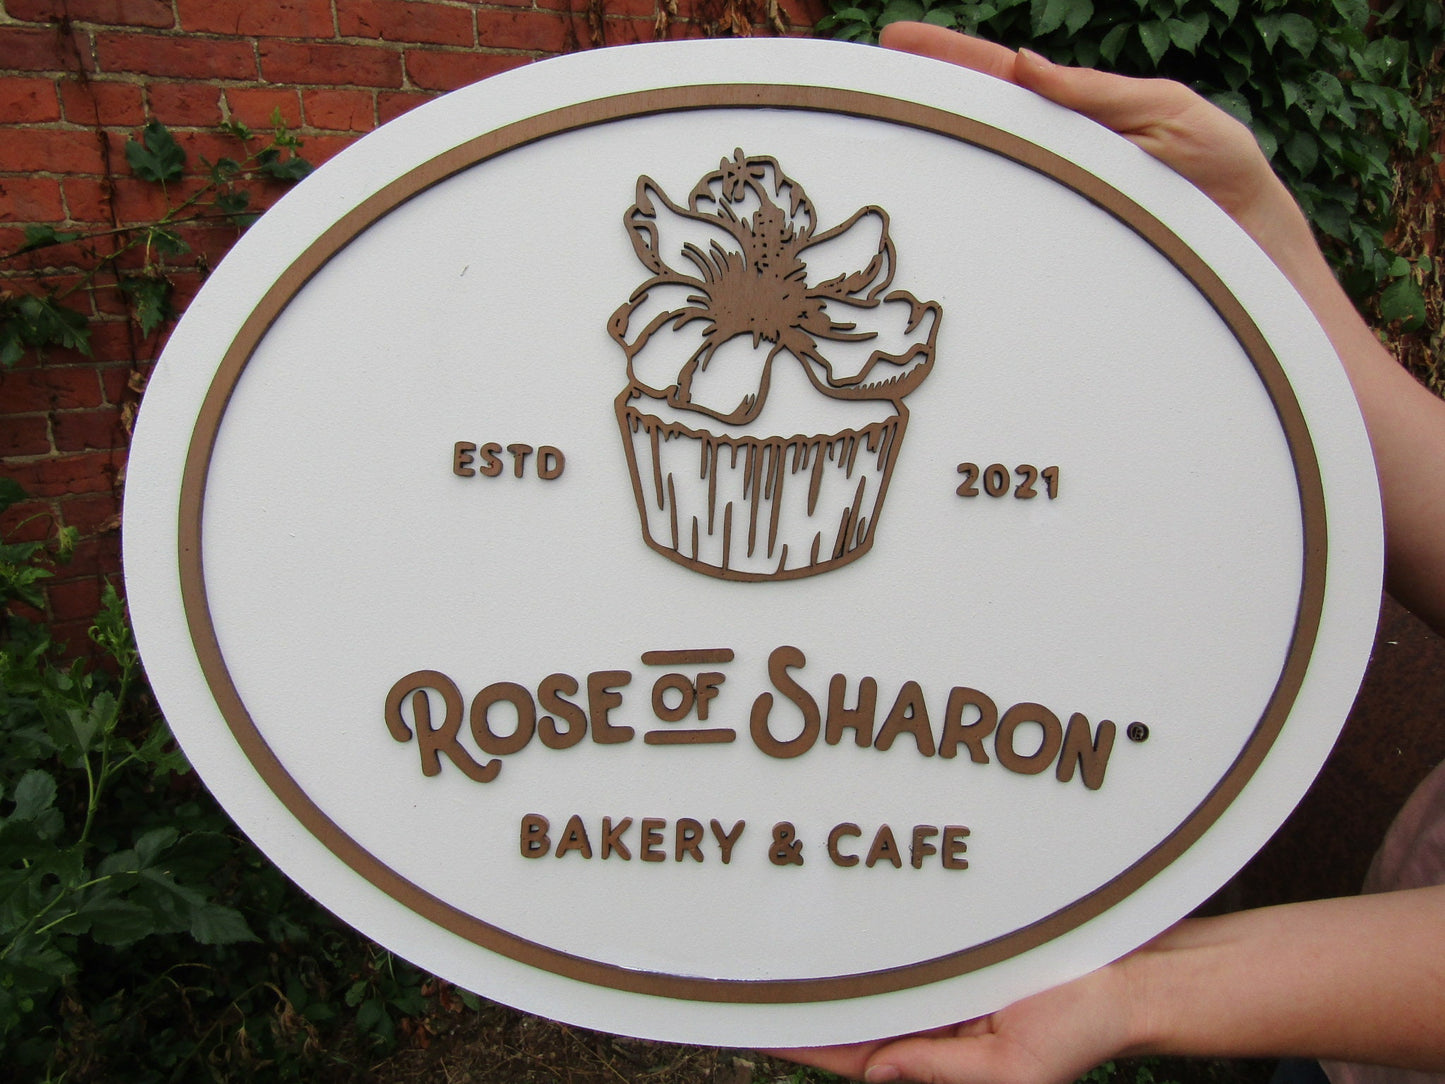 Custom Bakery And Cafe Sign Wooden Handmade Decor Cupcake Baker Rose of Sharon Your Logo Oval Commerical Signage Business Sign Restaurant